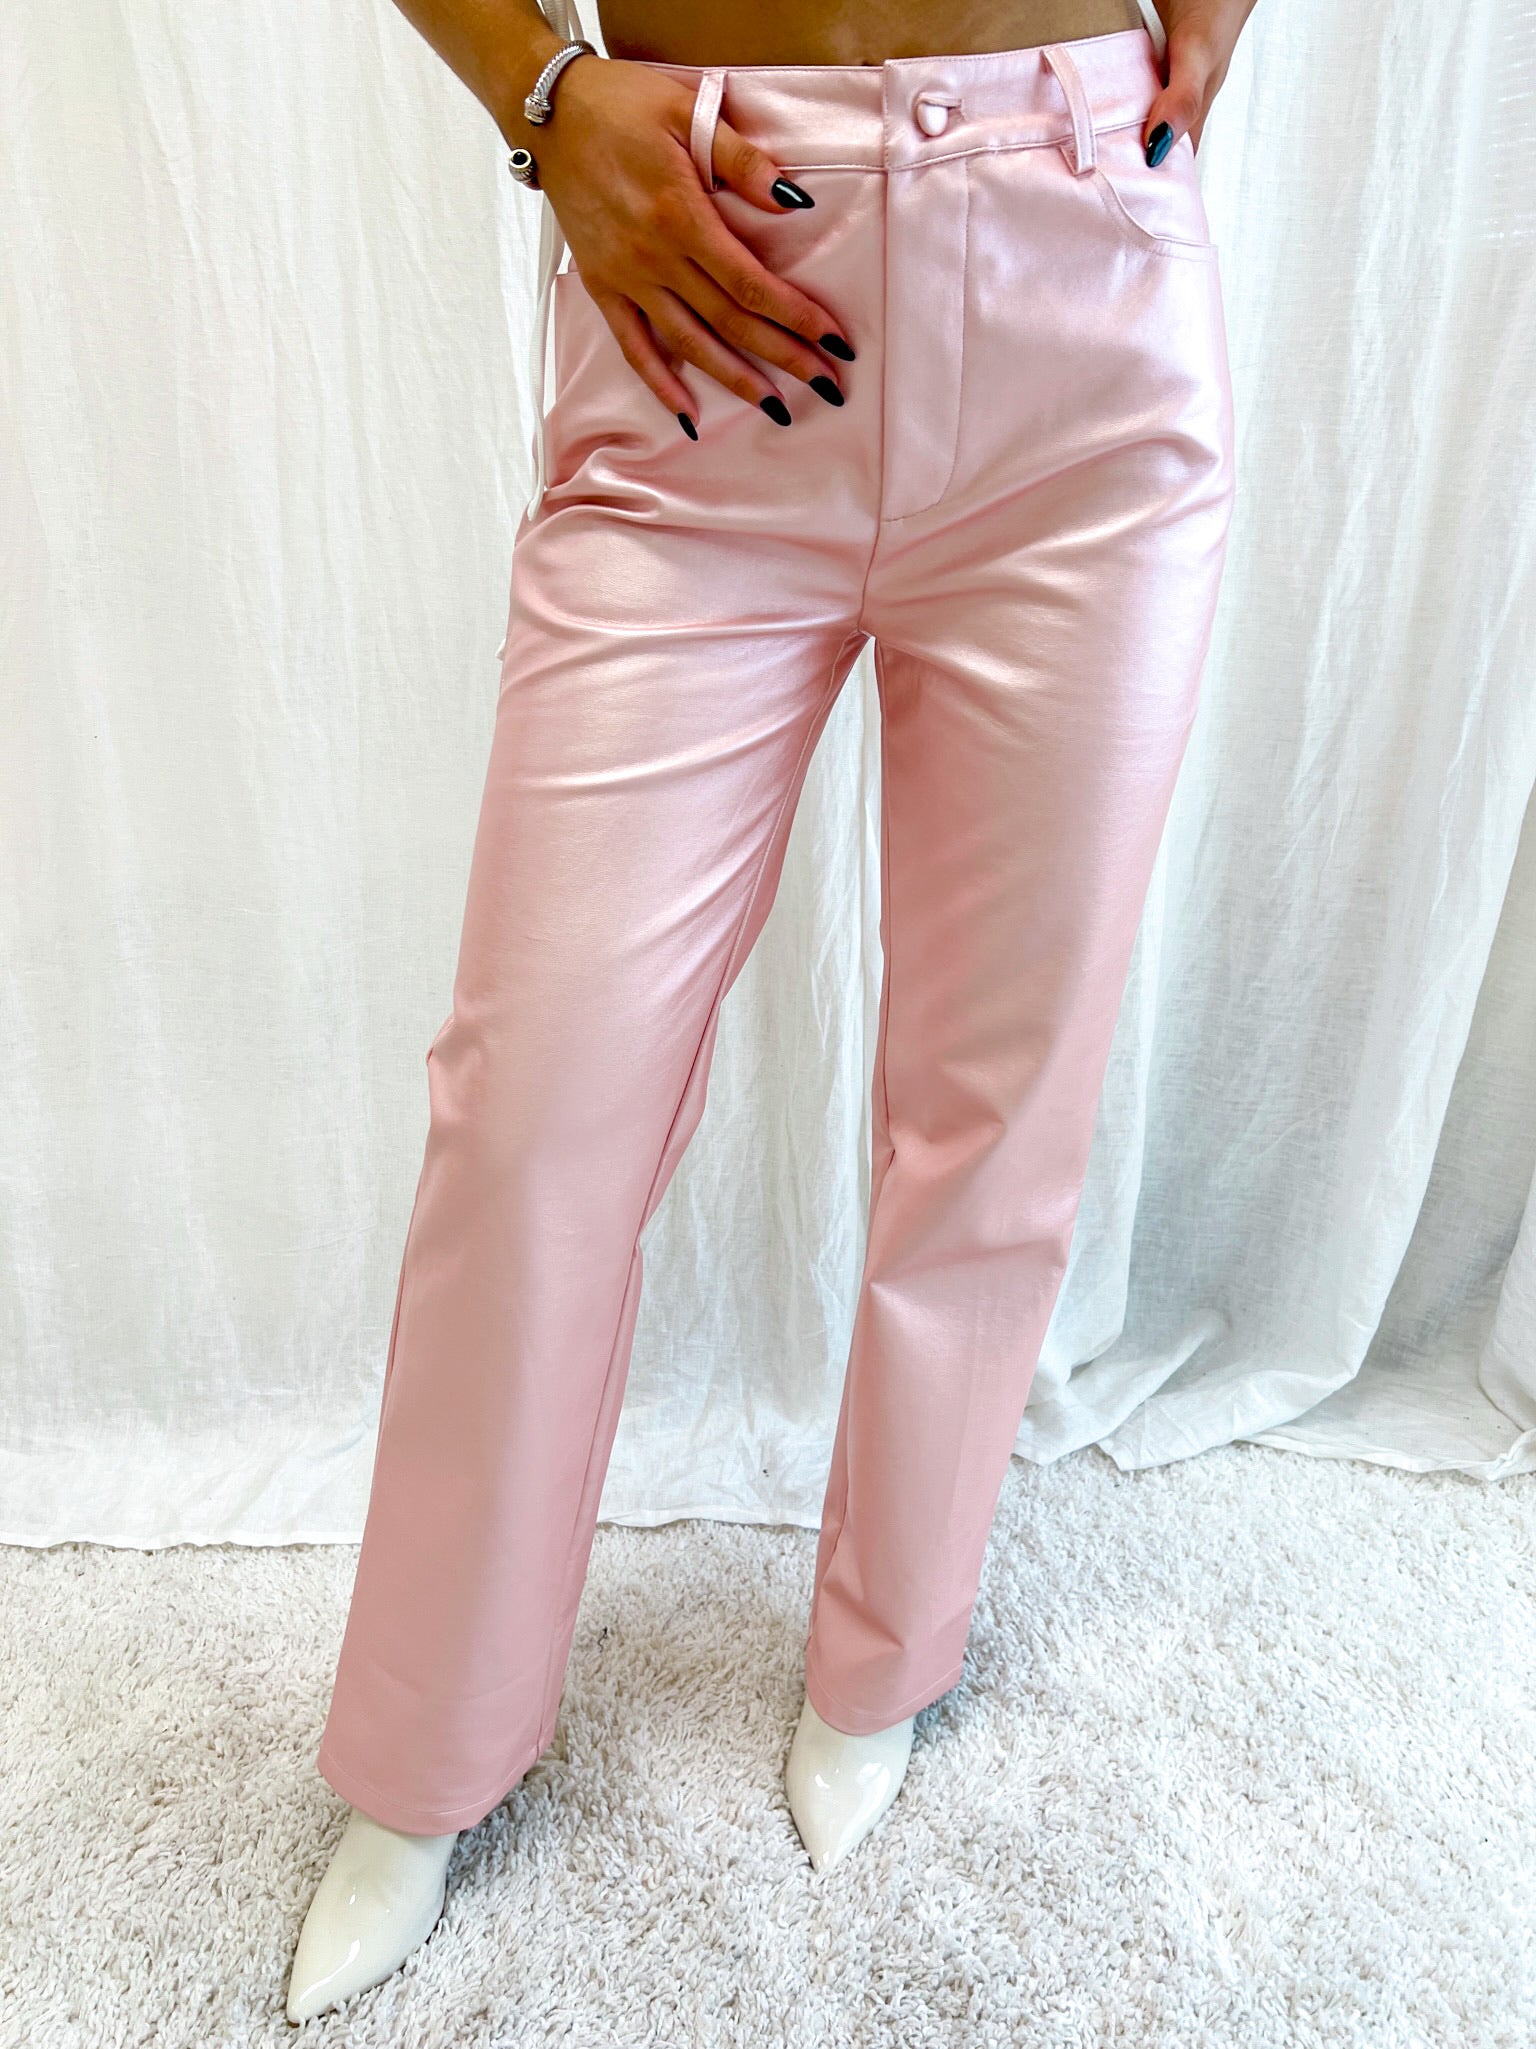 Hilda Of iceland Rare Vintage 100% Silk Hot Pink Pants and Top Set Size  Medium - $40 - From Kimberly